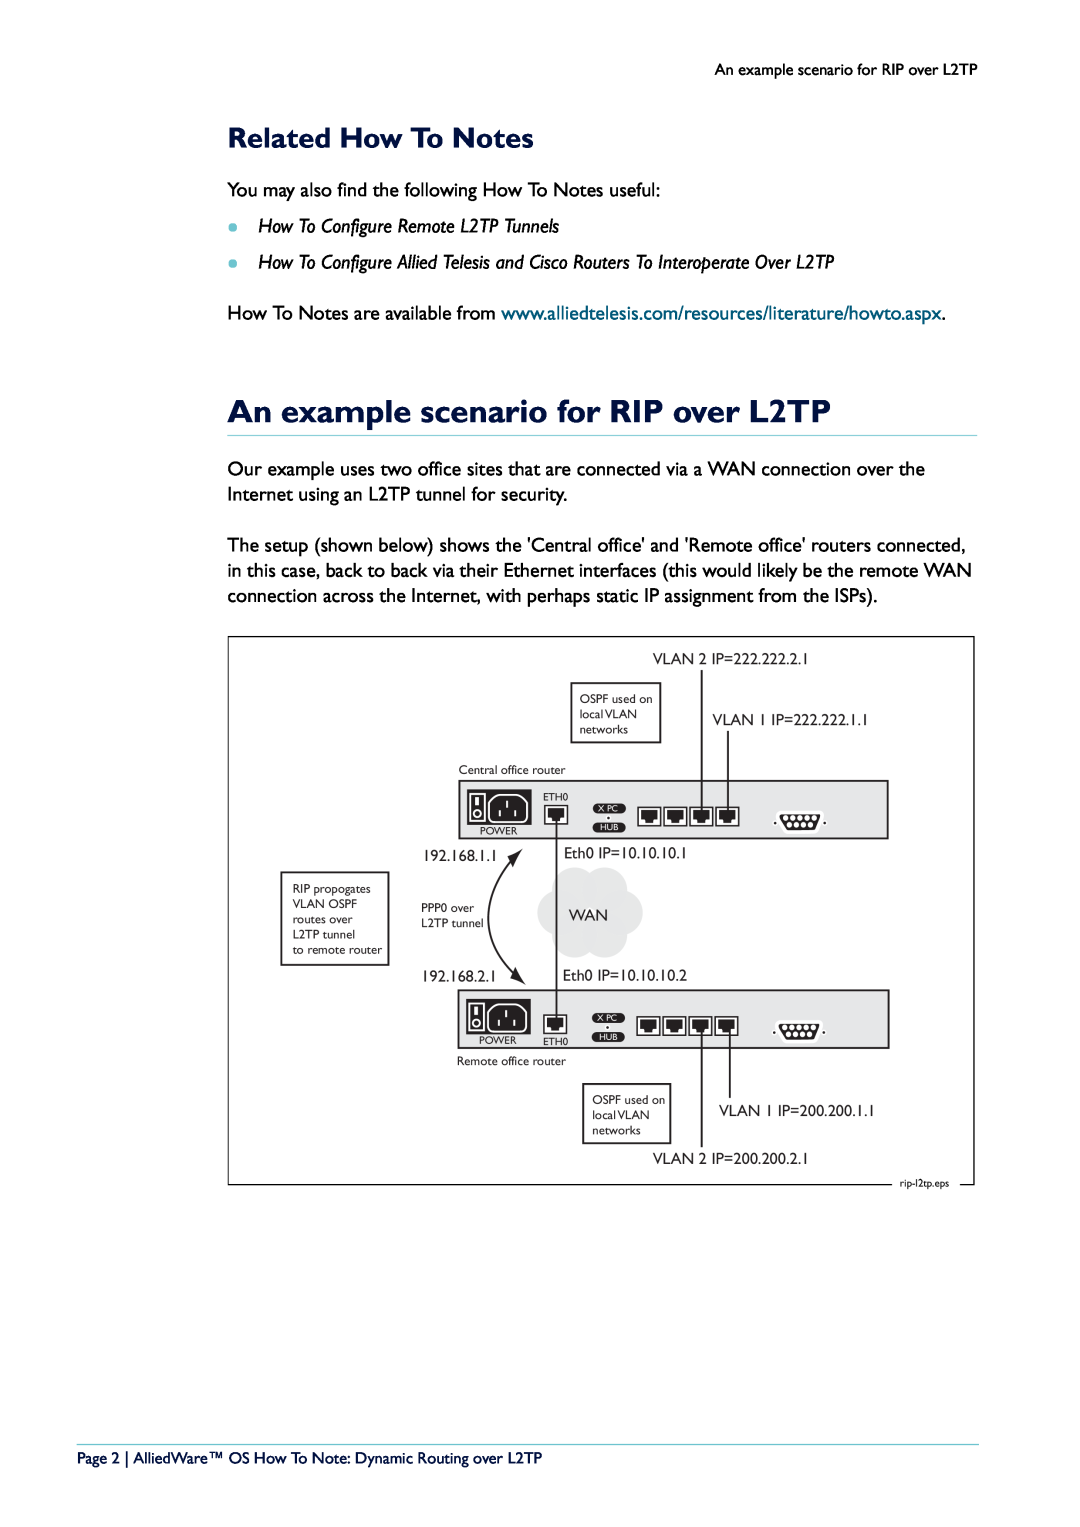 Allied Telesis L2TP Tunnel An example scenario for RIP over L2TP, Related How To Notes, VLAN 2 IP=222.222.2.1, 192.168.1.1 